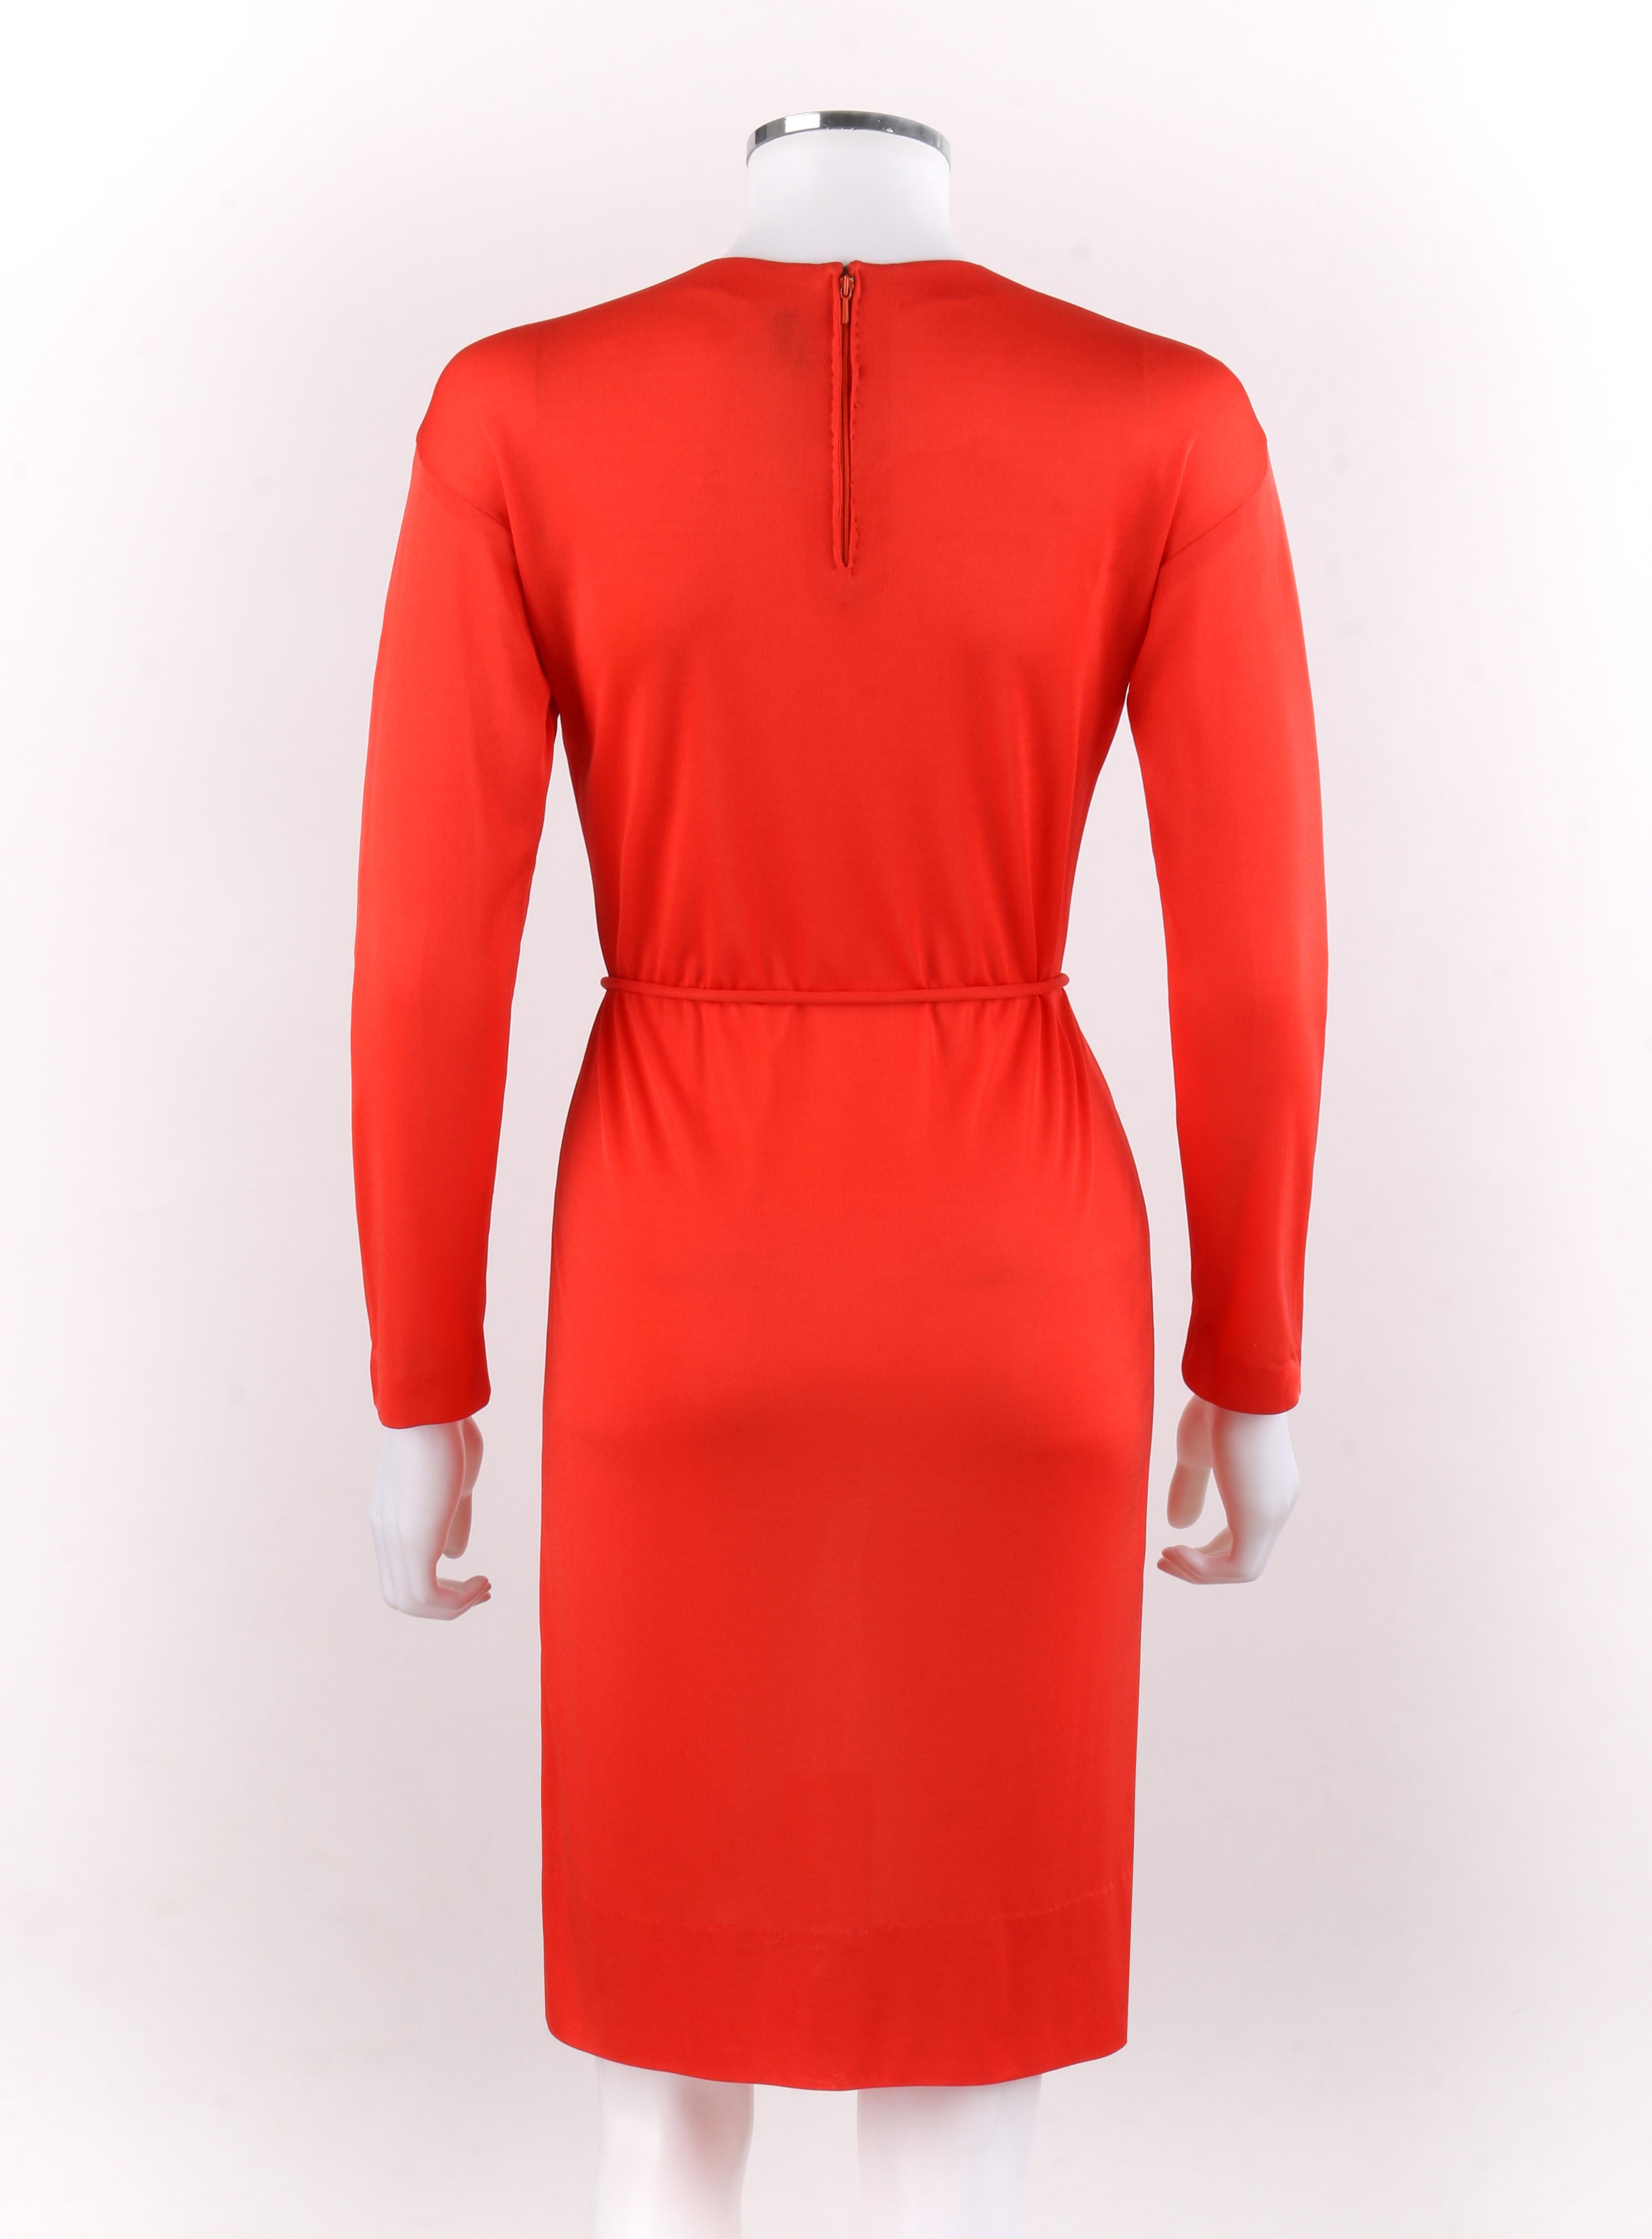 EMILIO PUCCI c.1960’s Coppola E Toppo Belted Scarlet Red Silk Jersey Dress 1